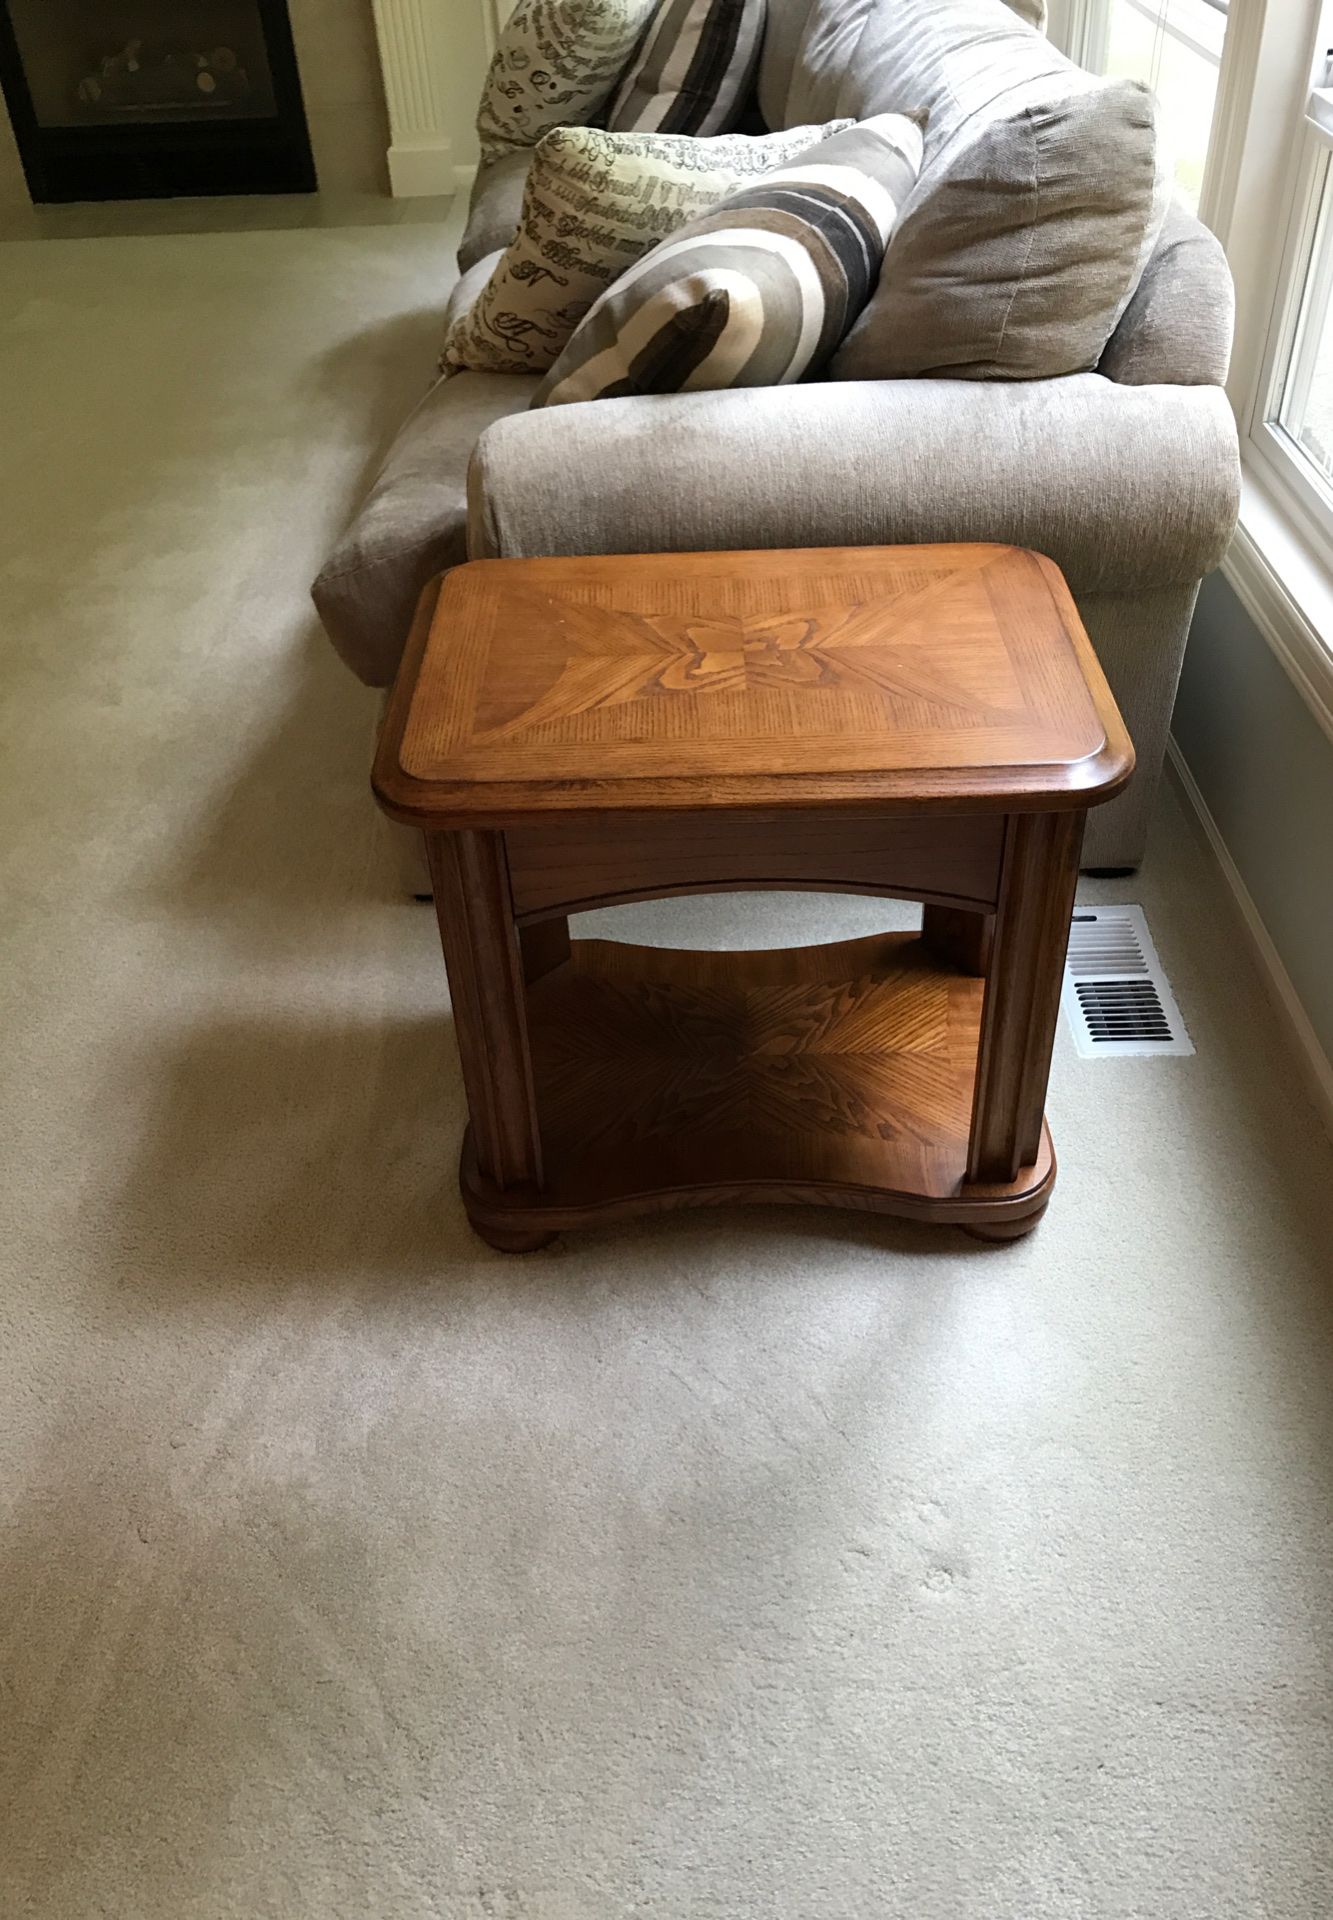 Two solid oak end tables. Both in excellent condition $25 for both